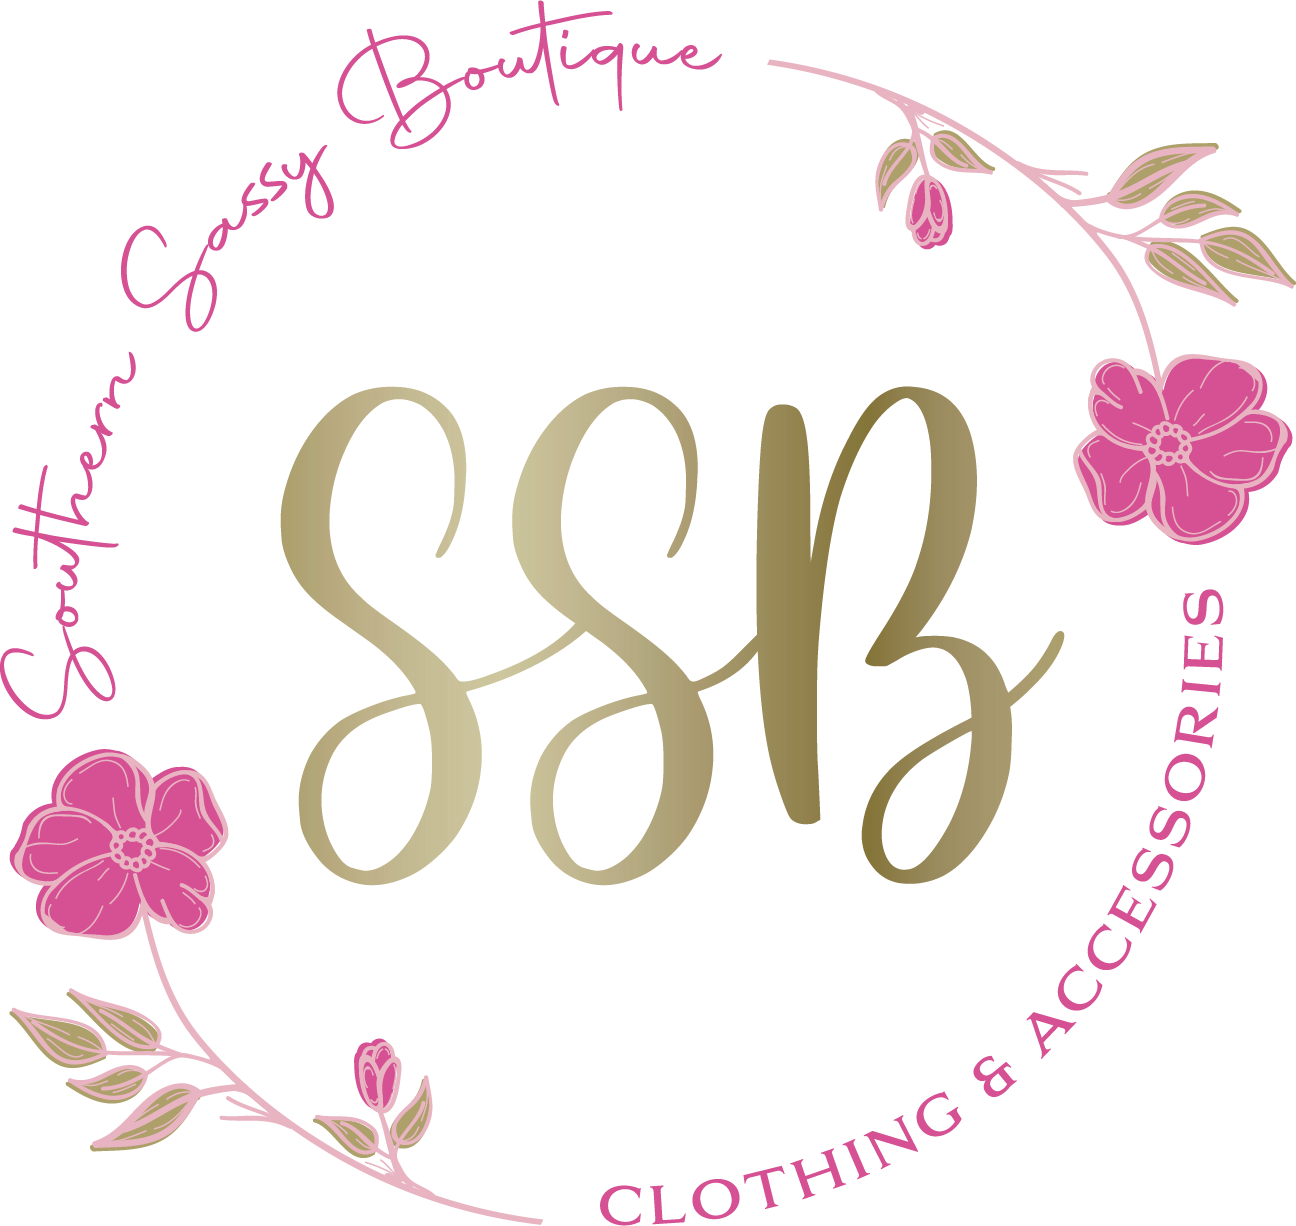 Southern Sassy Boutique